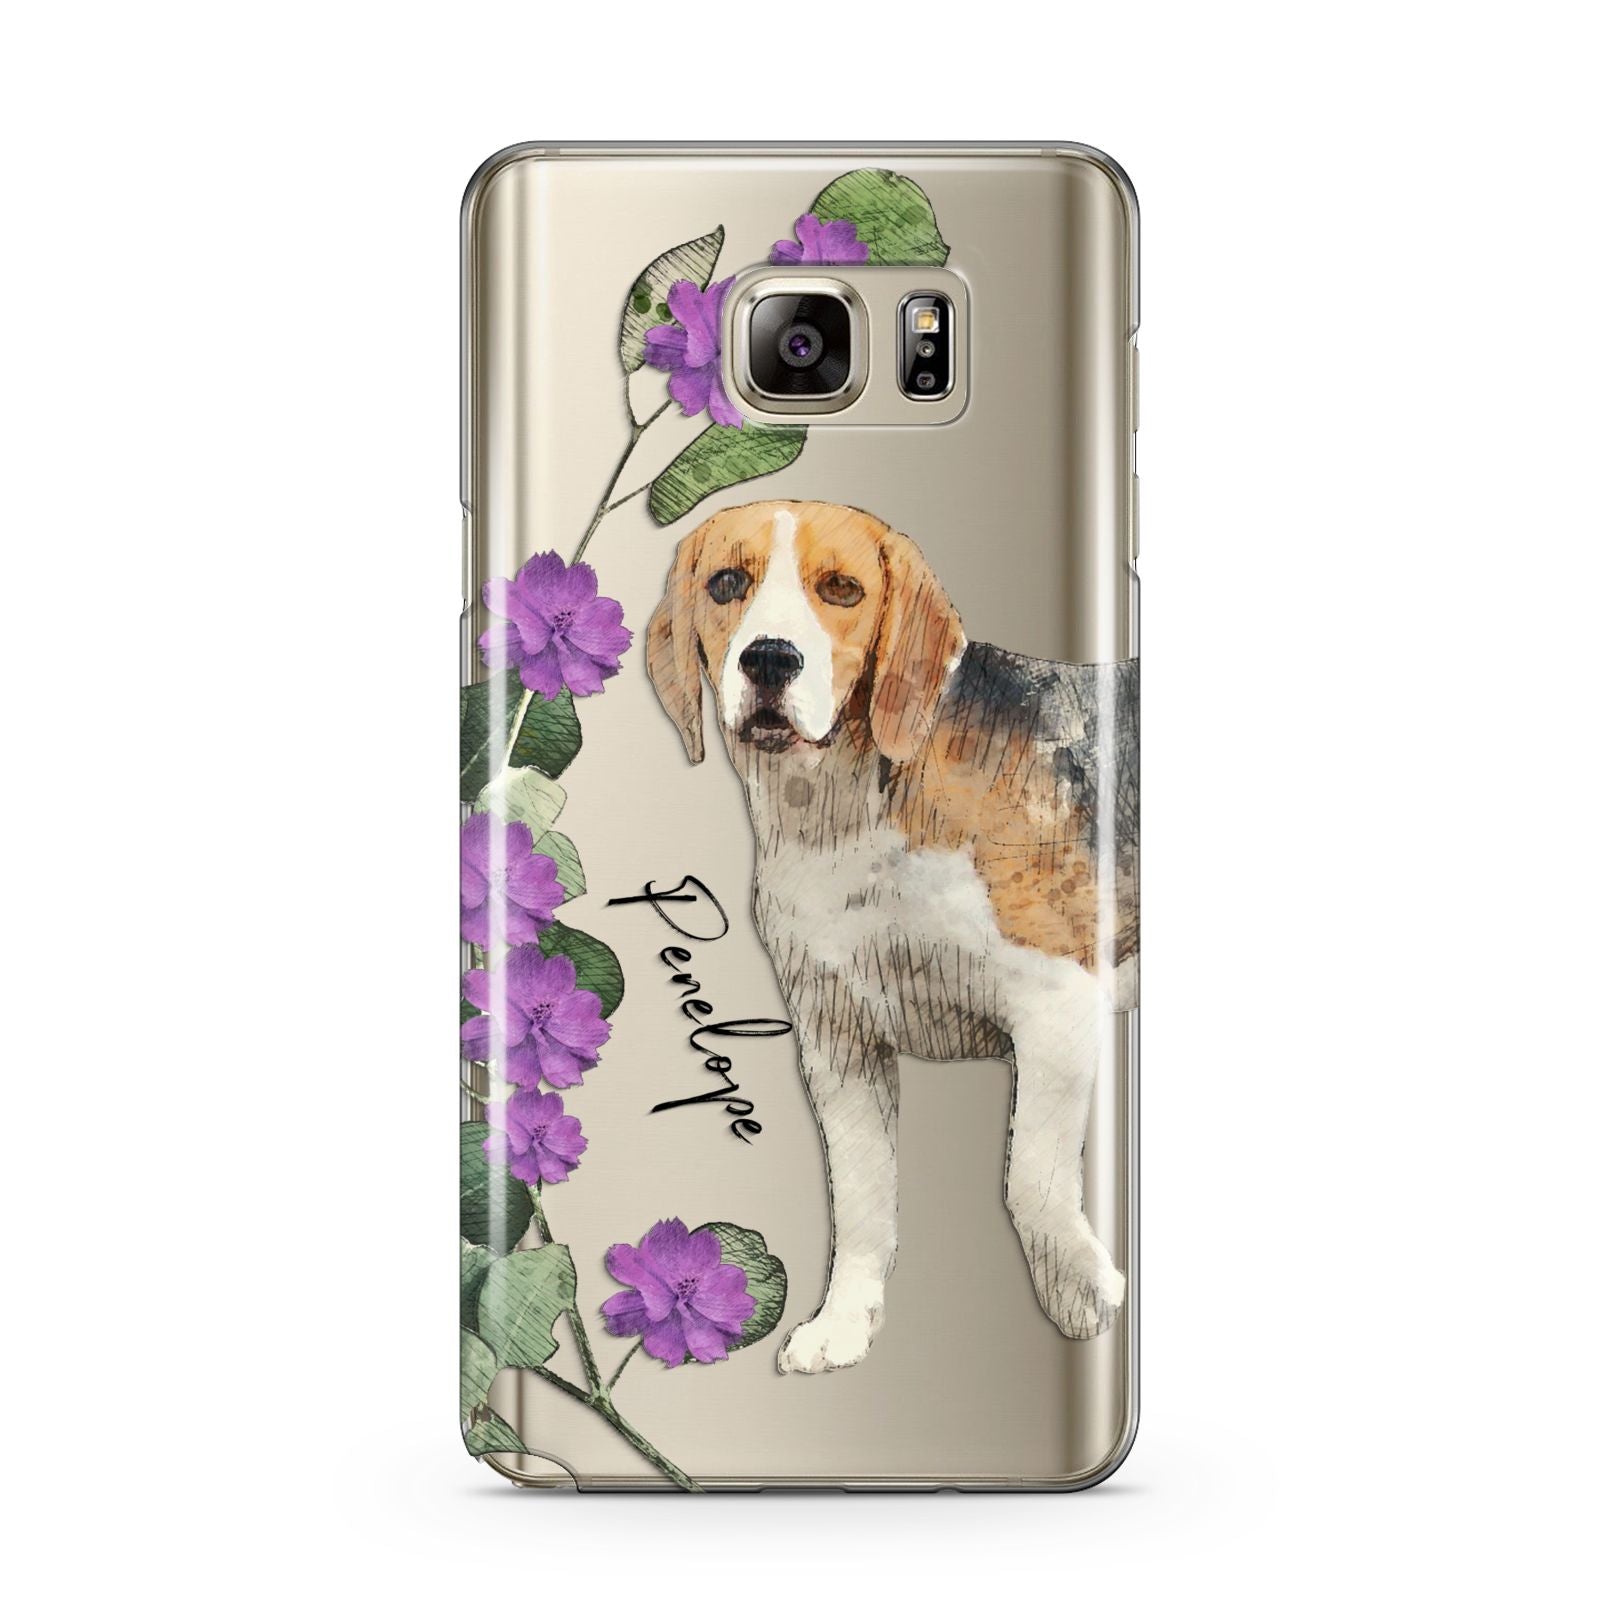 Personalised Dog Samsung Galaxy Note 5 Case